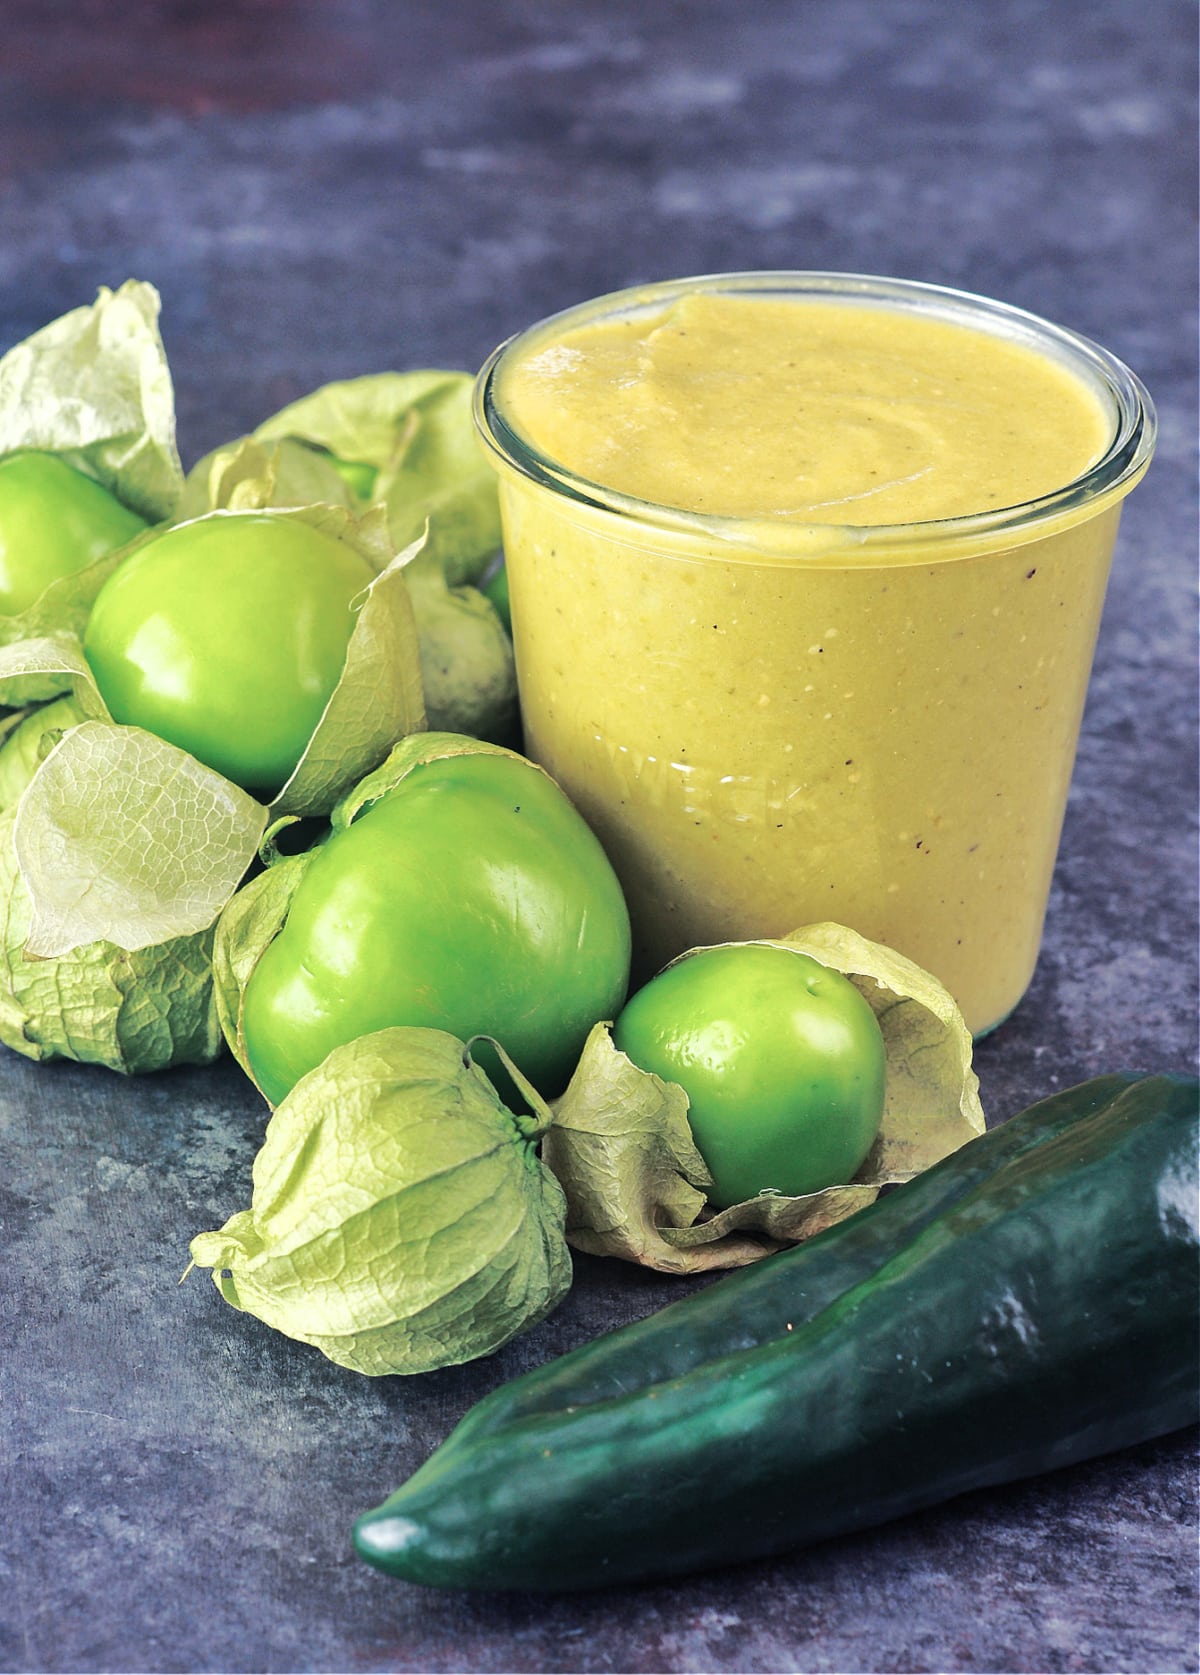 Homemade green tomatillo enchilada sauce in a glass canning jar, surrounded by whole fresh tomatillos and peppers.